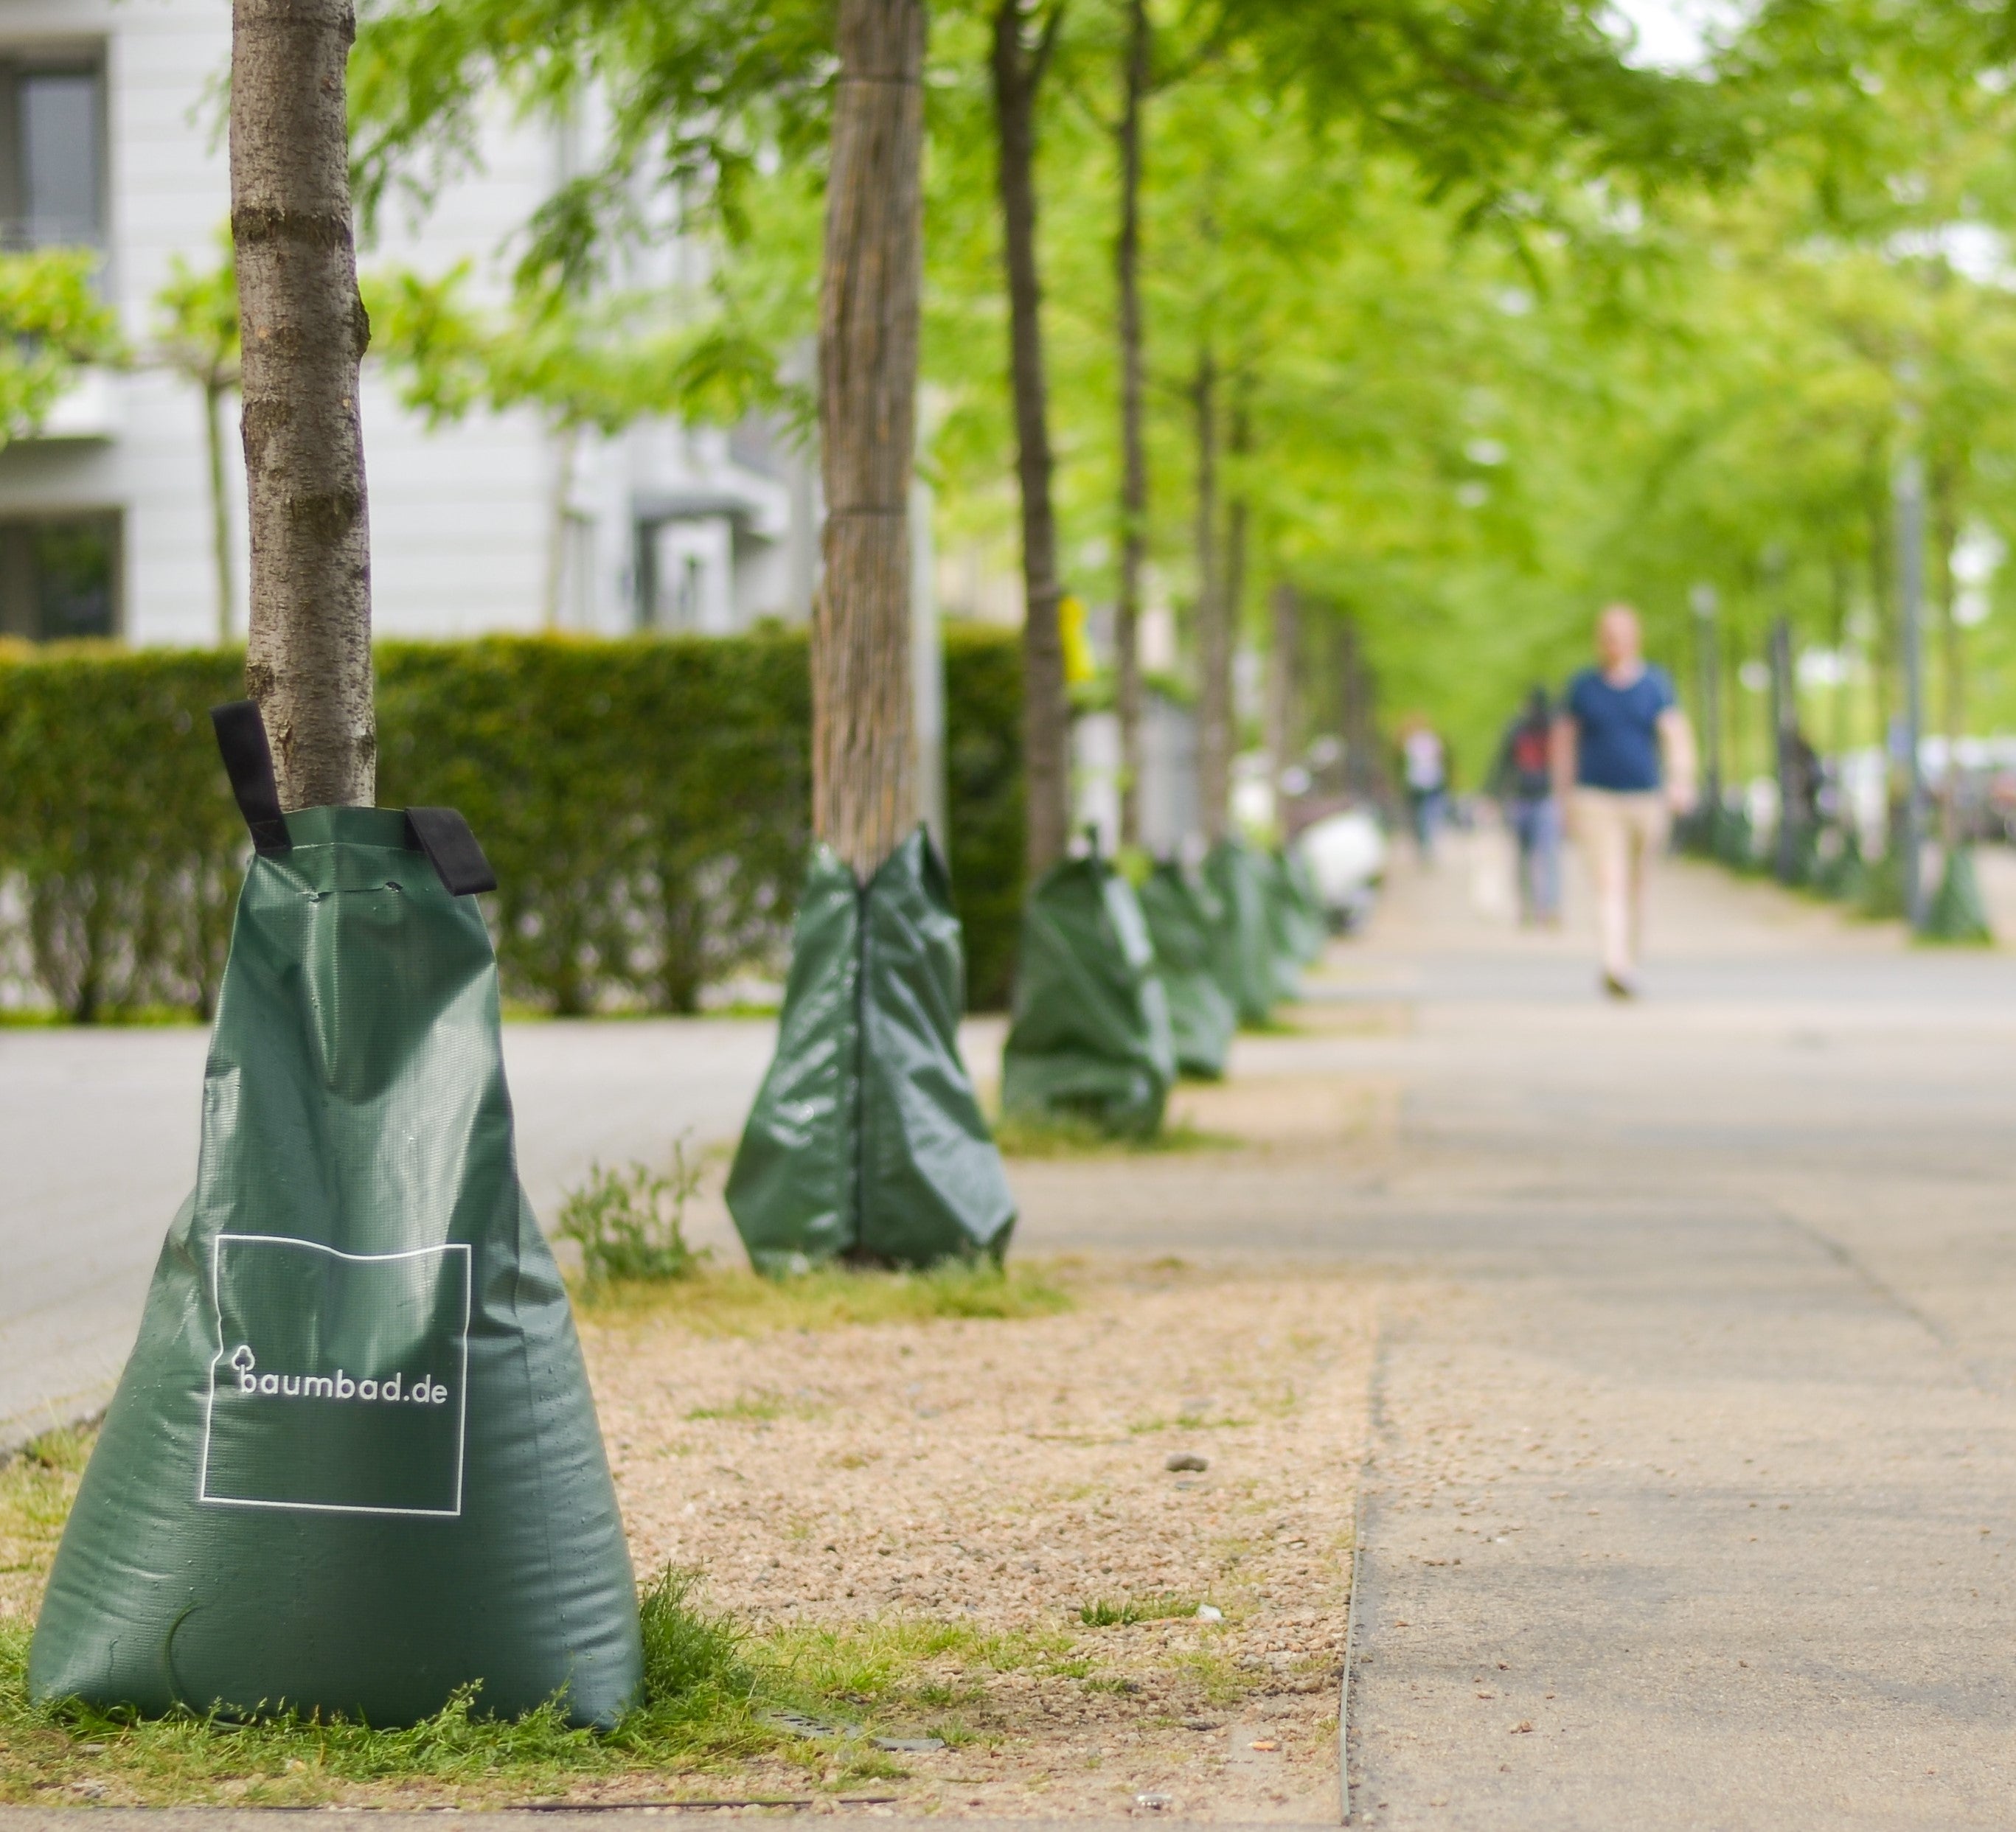 Irrigation bags for cities and municipalities